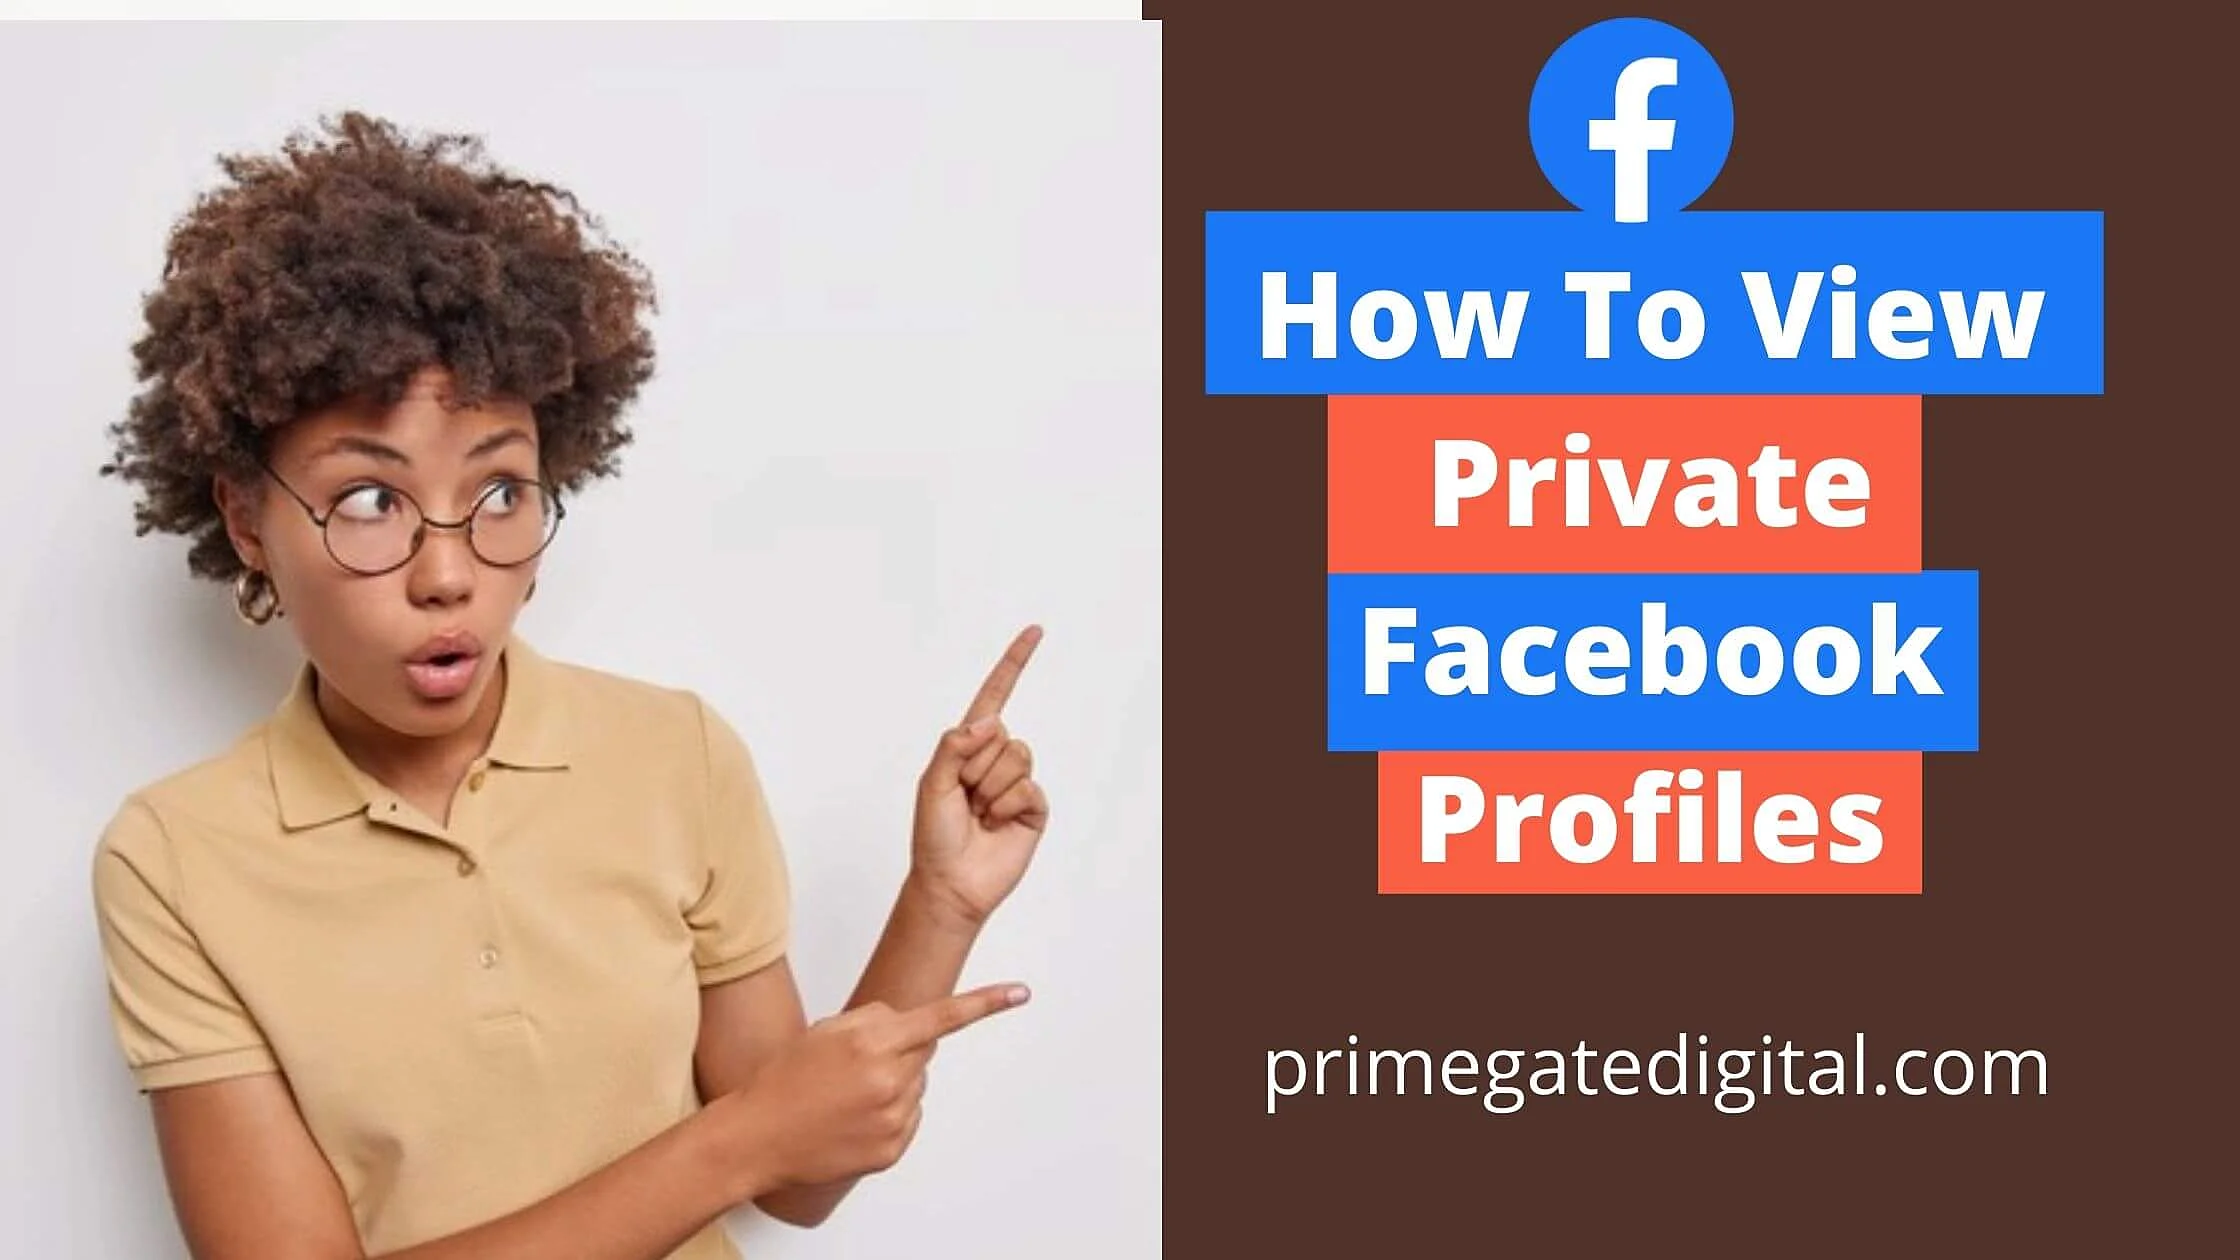 How To View Private Facebook Profiles